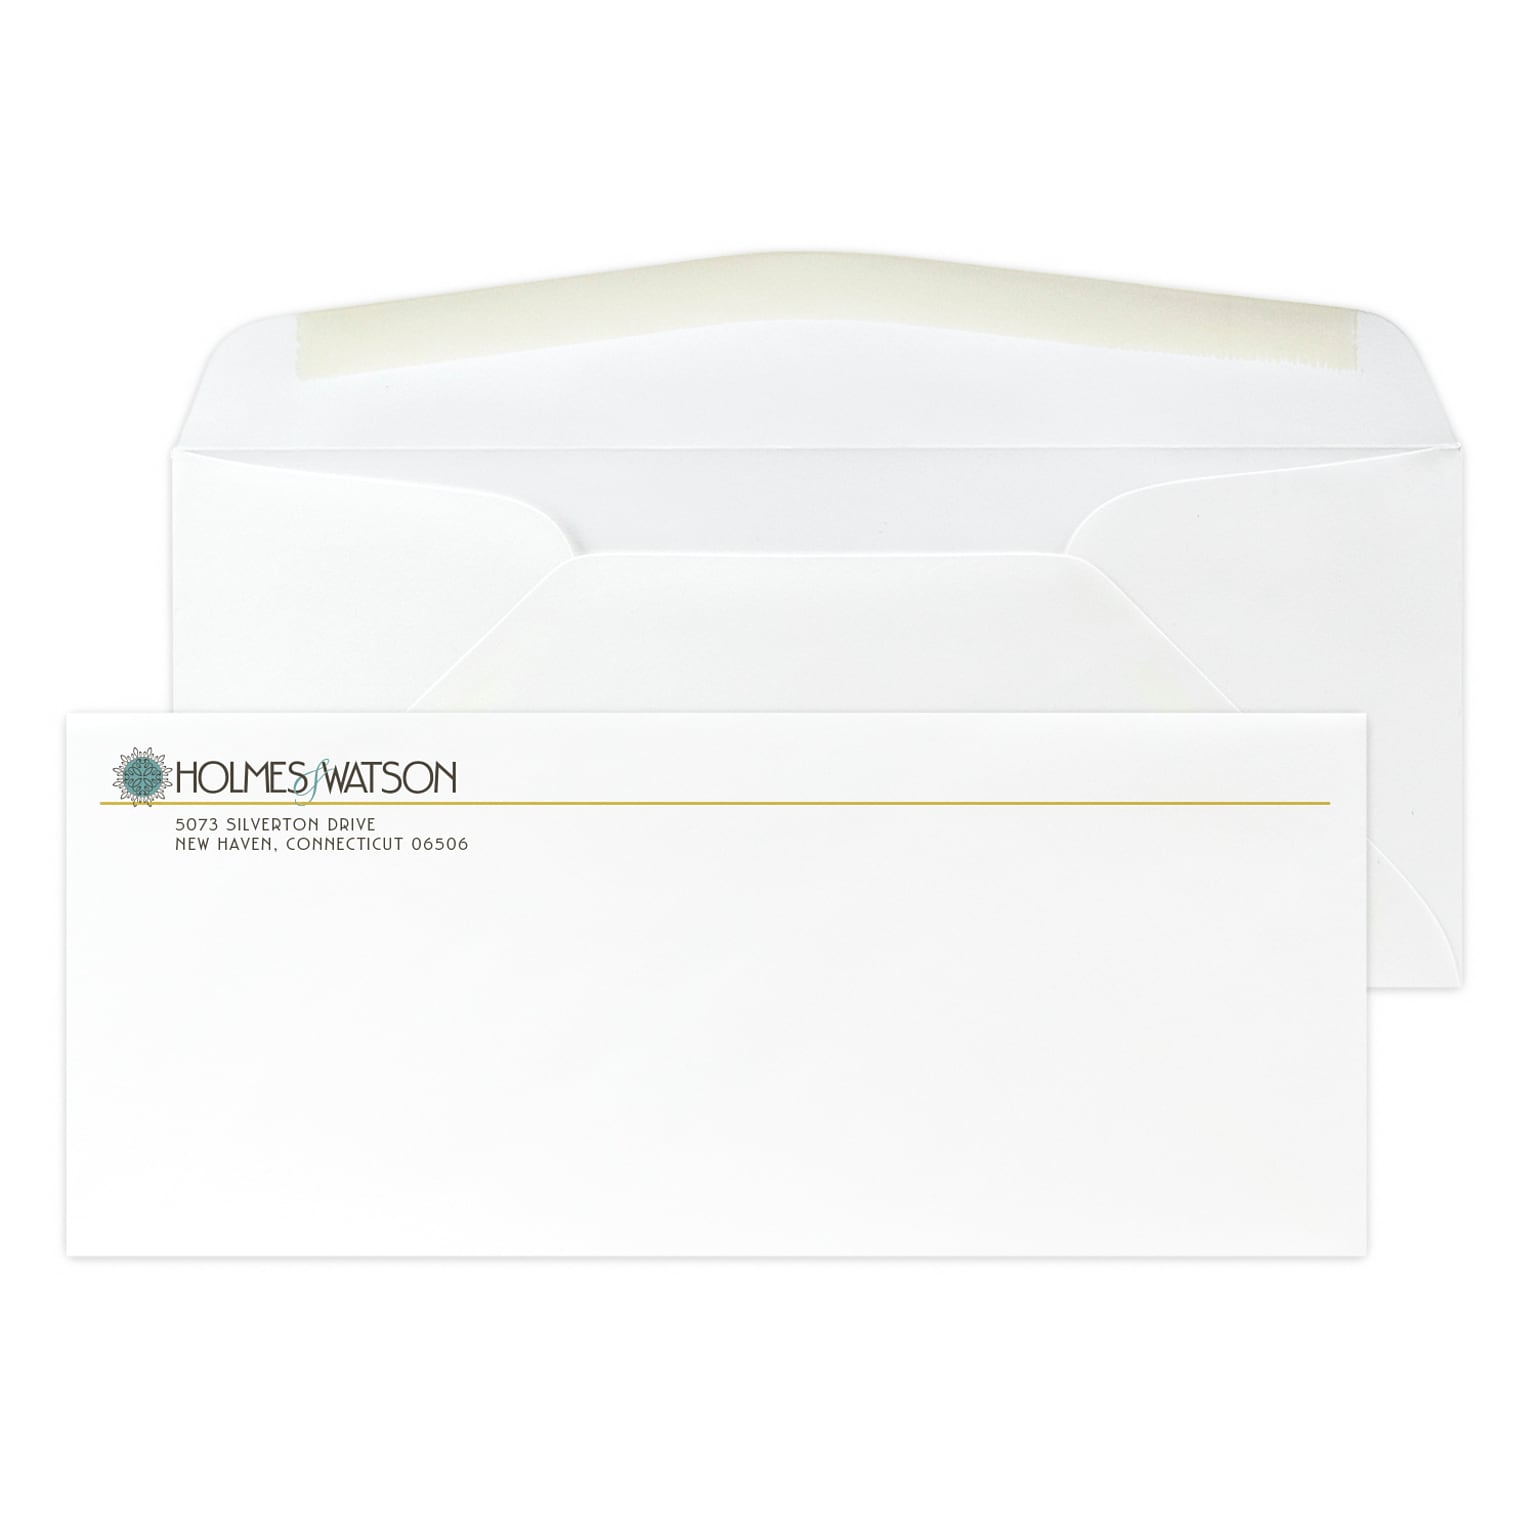 Custom Full Color #10 Stationery Envelopes, 4 1/4 x 9 1/2, 70# Cougar Opaque Smooth White, Flat Ink, 250 / Pack